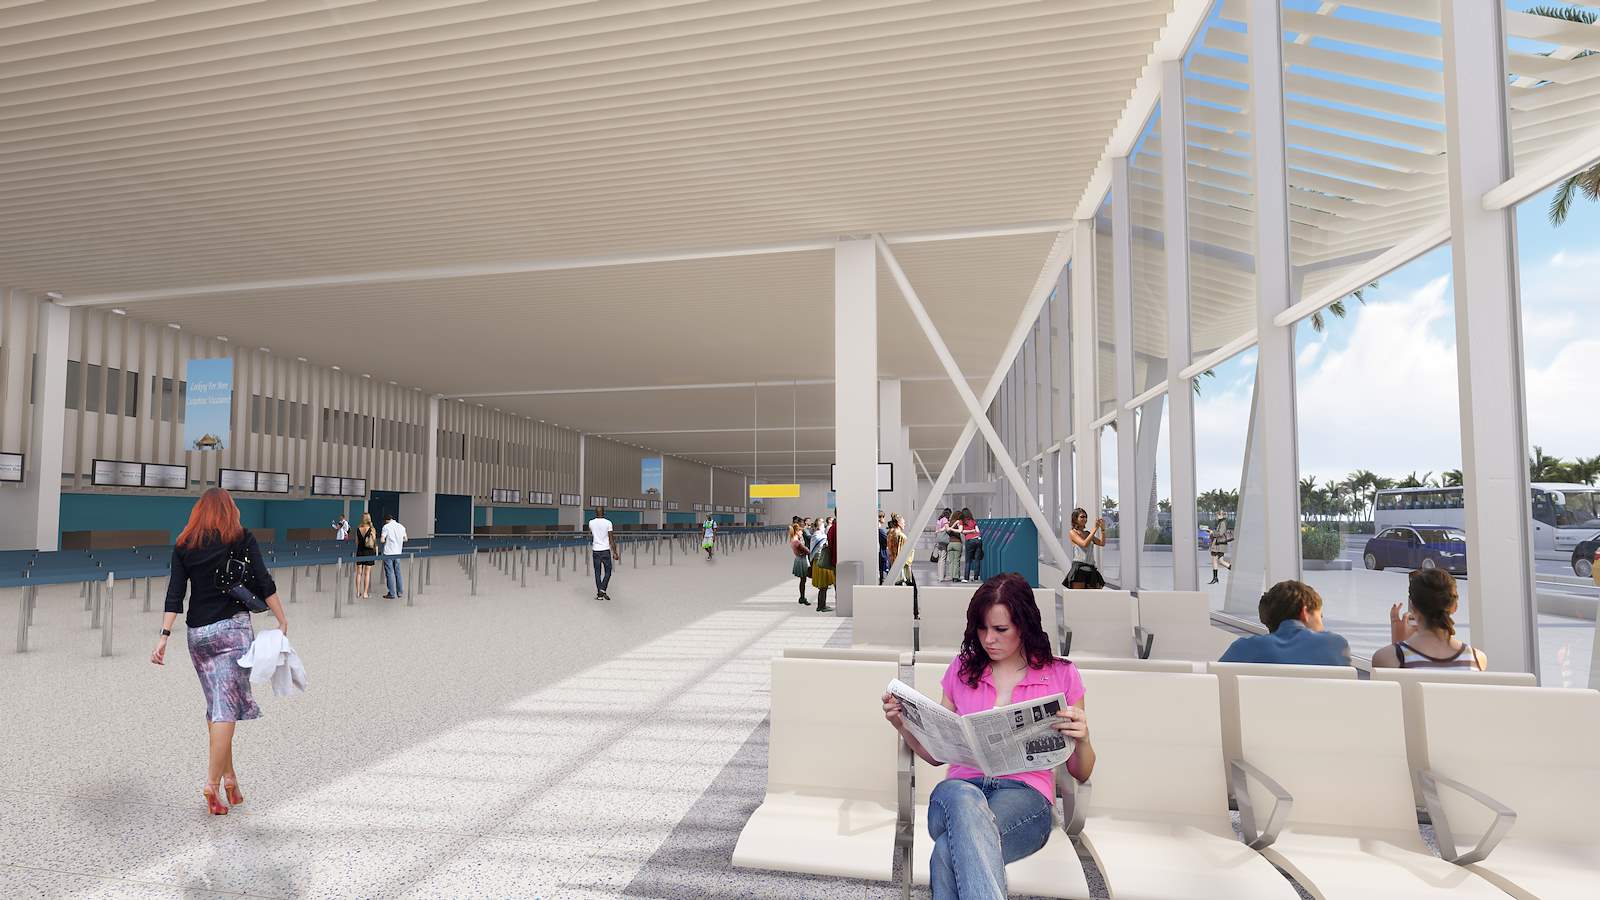 Gold certification for expanded airport terminal Render of the expansion airport terminal of the Queen Beatrix International Airport in Aruba